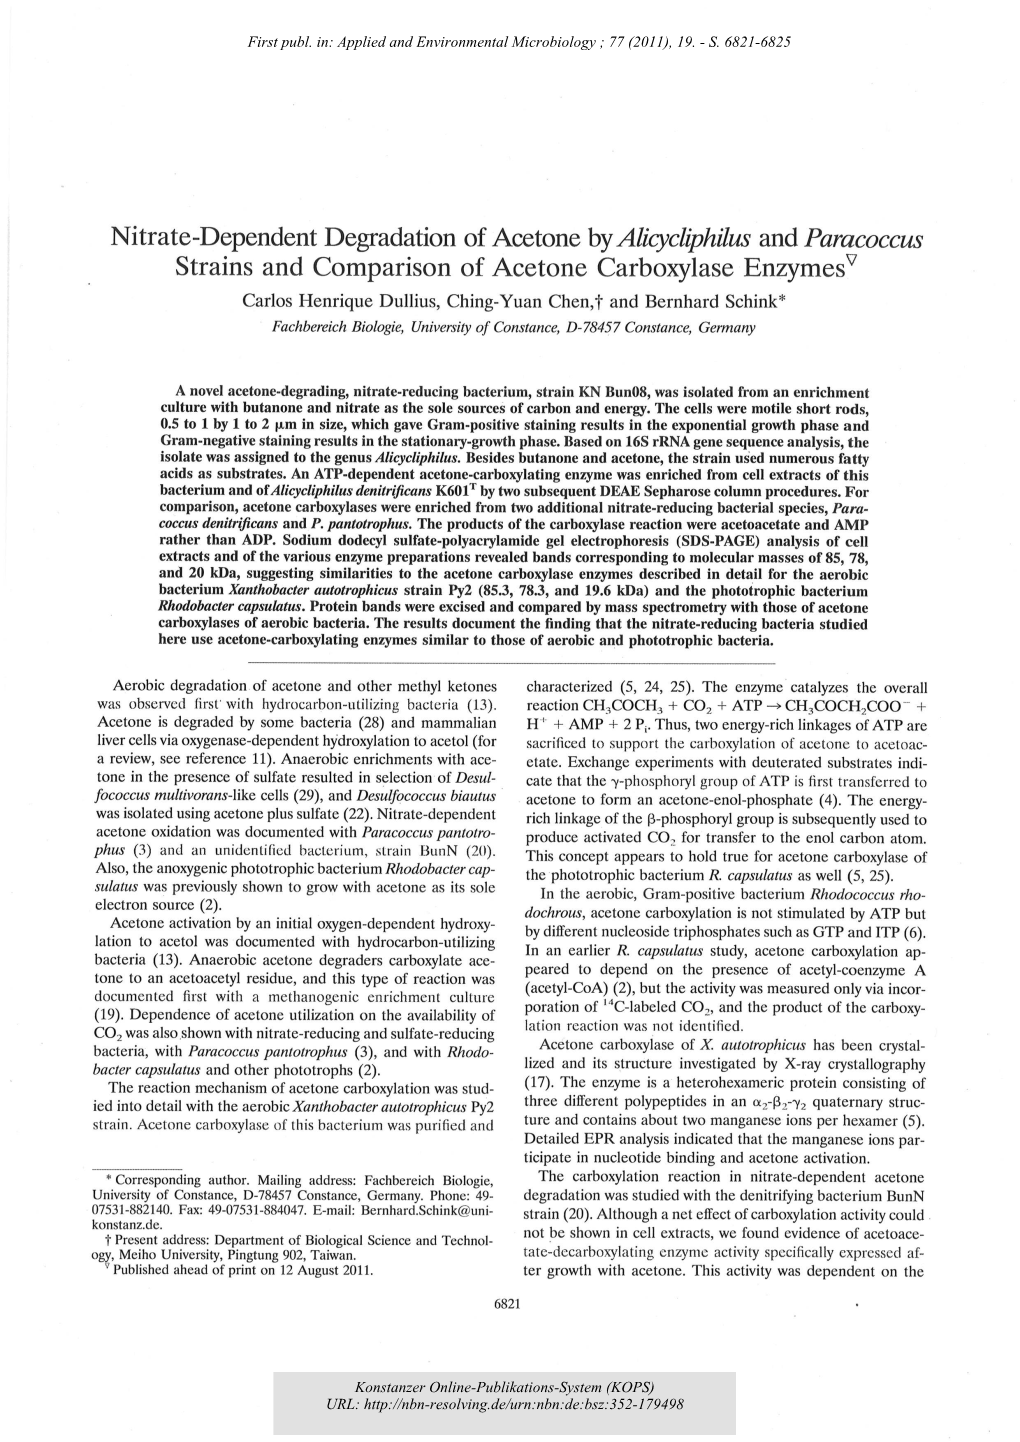 Nitrate-Dependent Degradation of Acetone by Alicycliphilus And